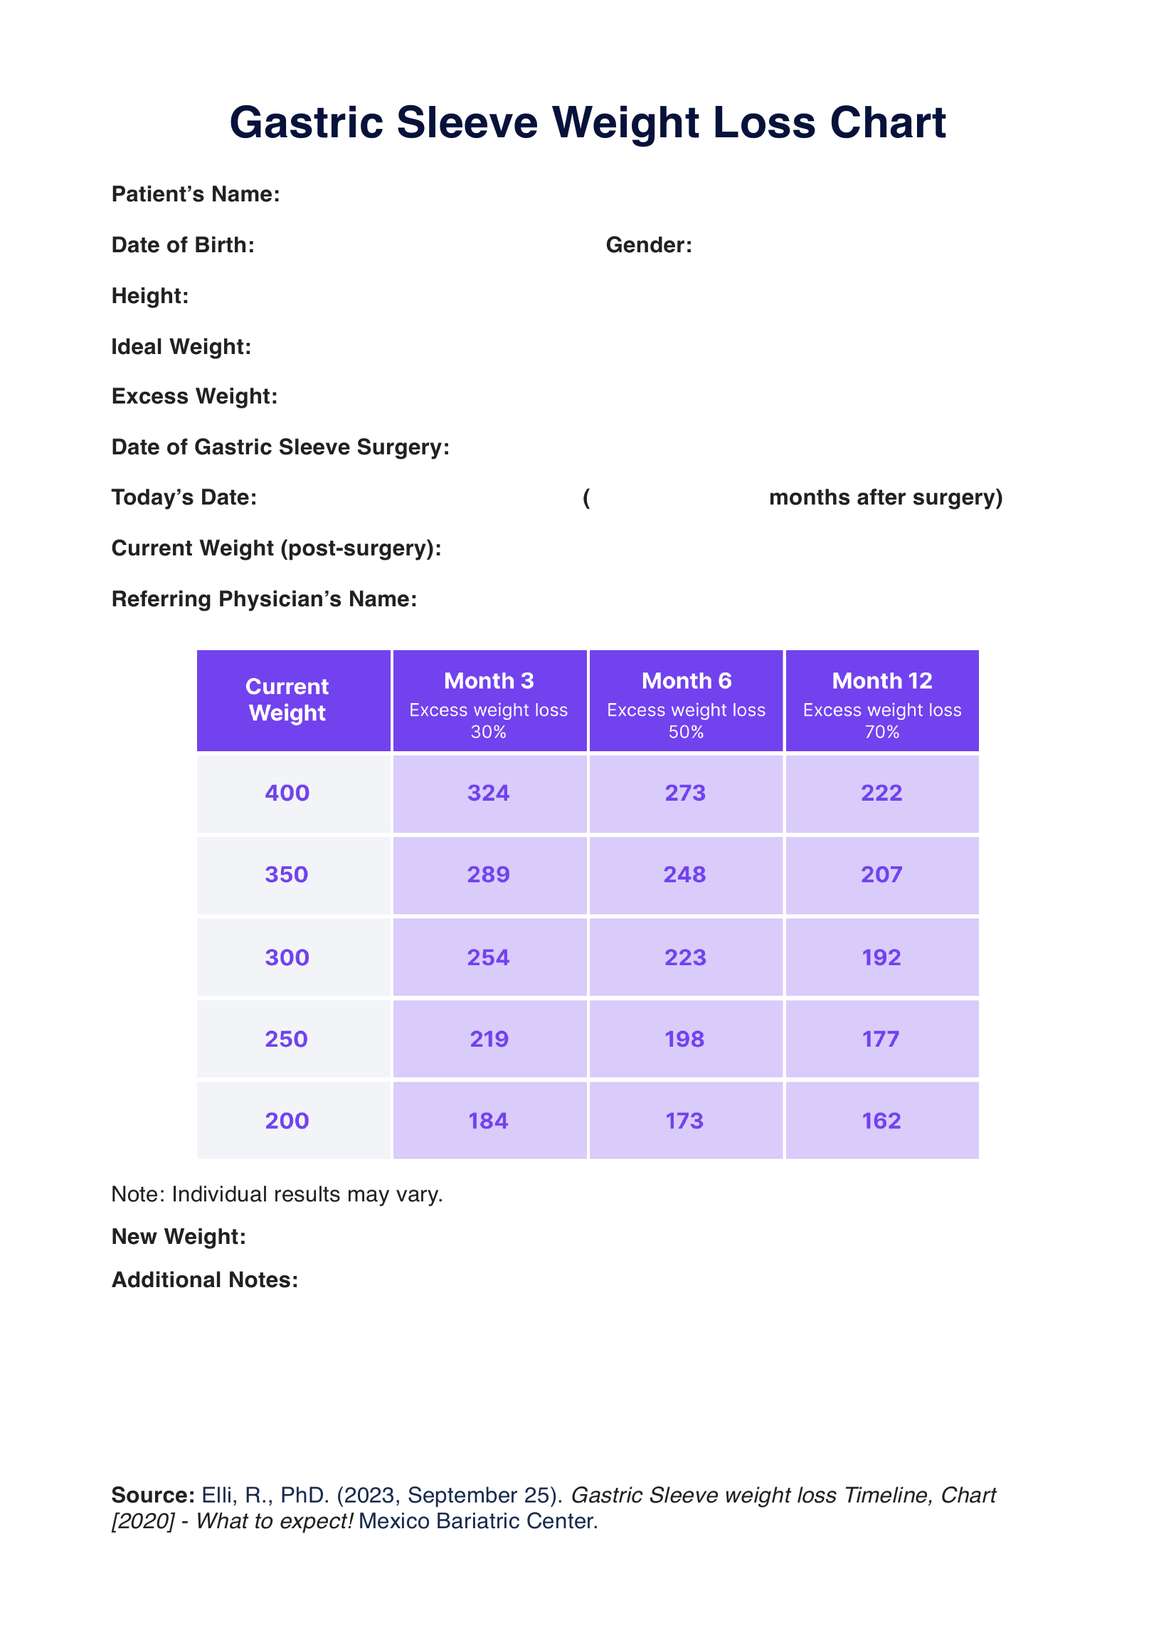 Gastric Sleeve Weight Loss Chart PDF Example